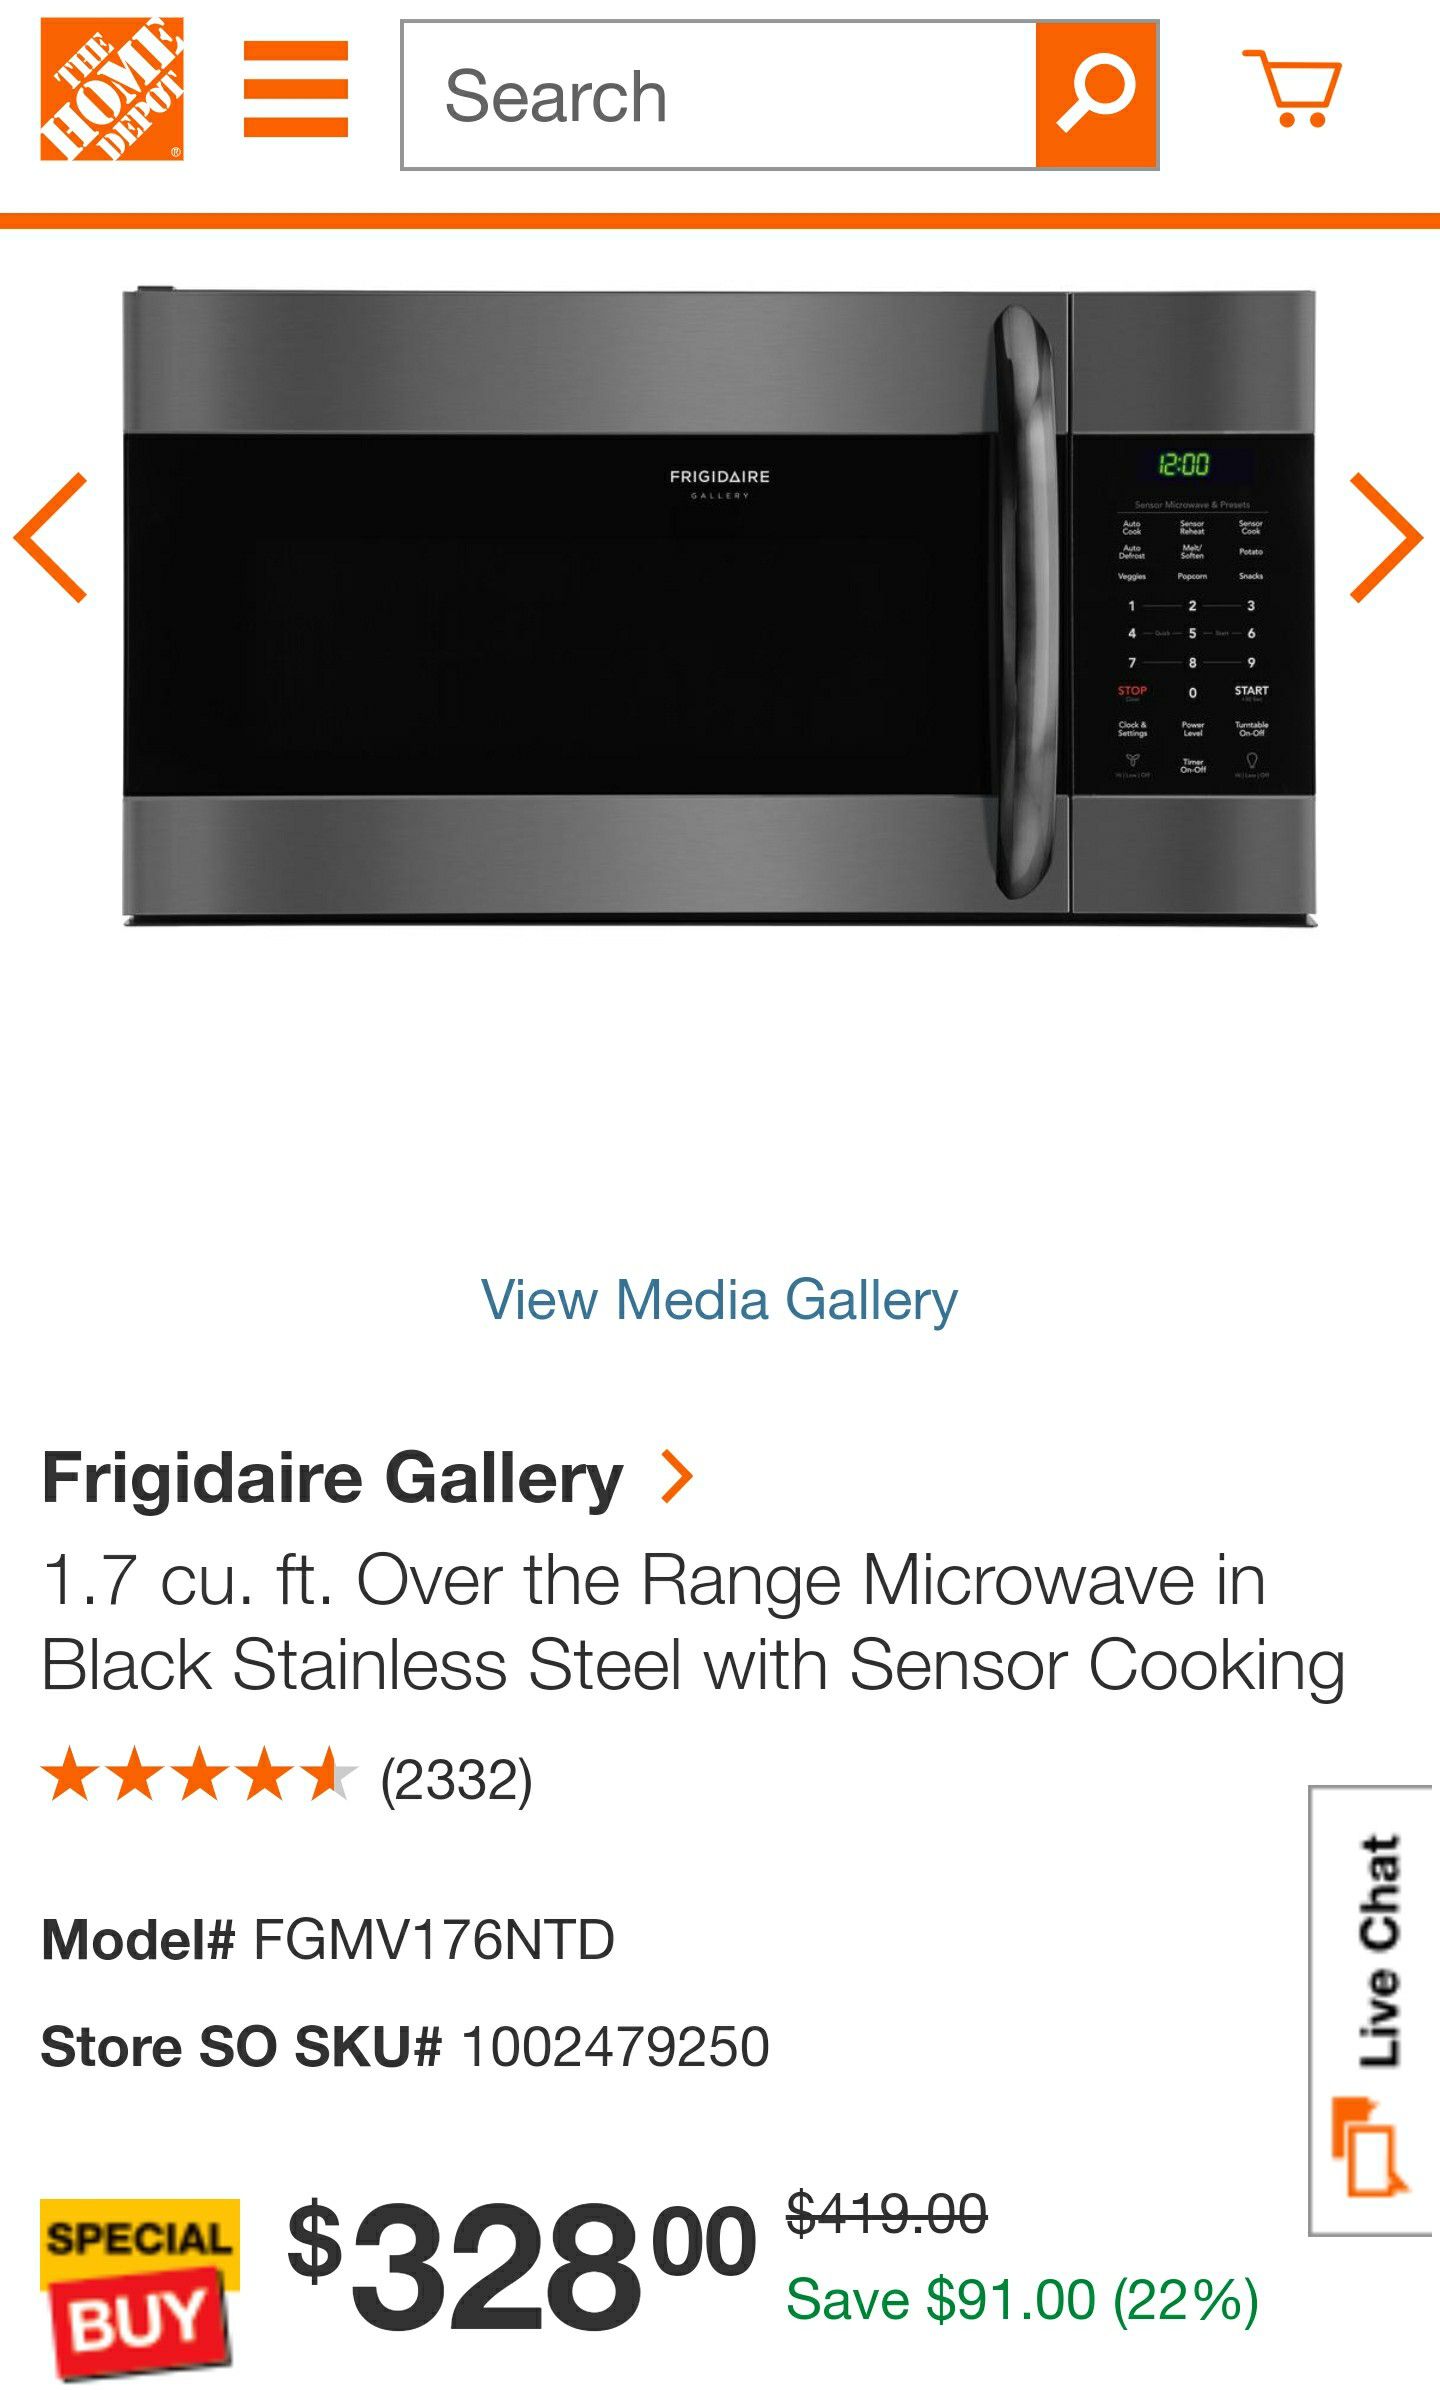 Frigidaire Gallery 1.7 cu. ft. Over the Range Microwave in Black Stainless Steel with Sensor Cooking BRAND NEW